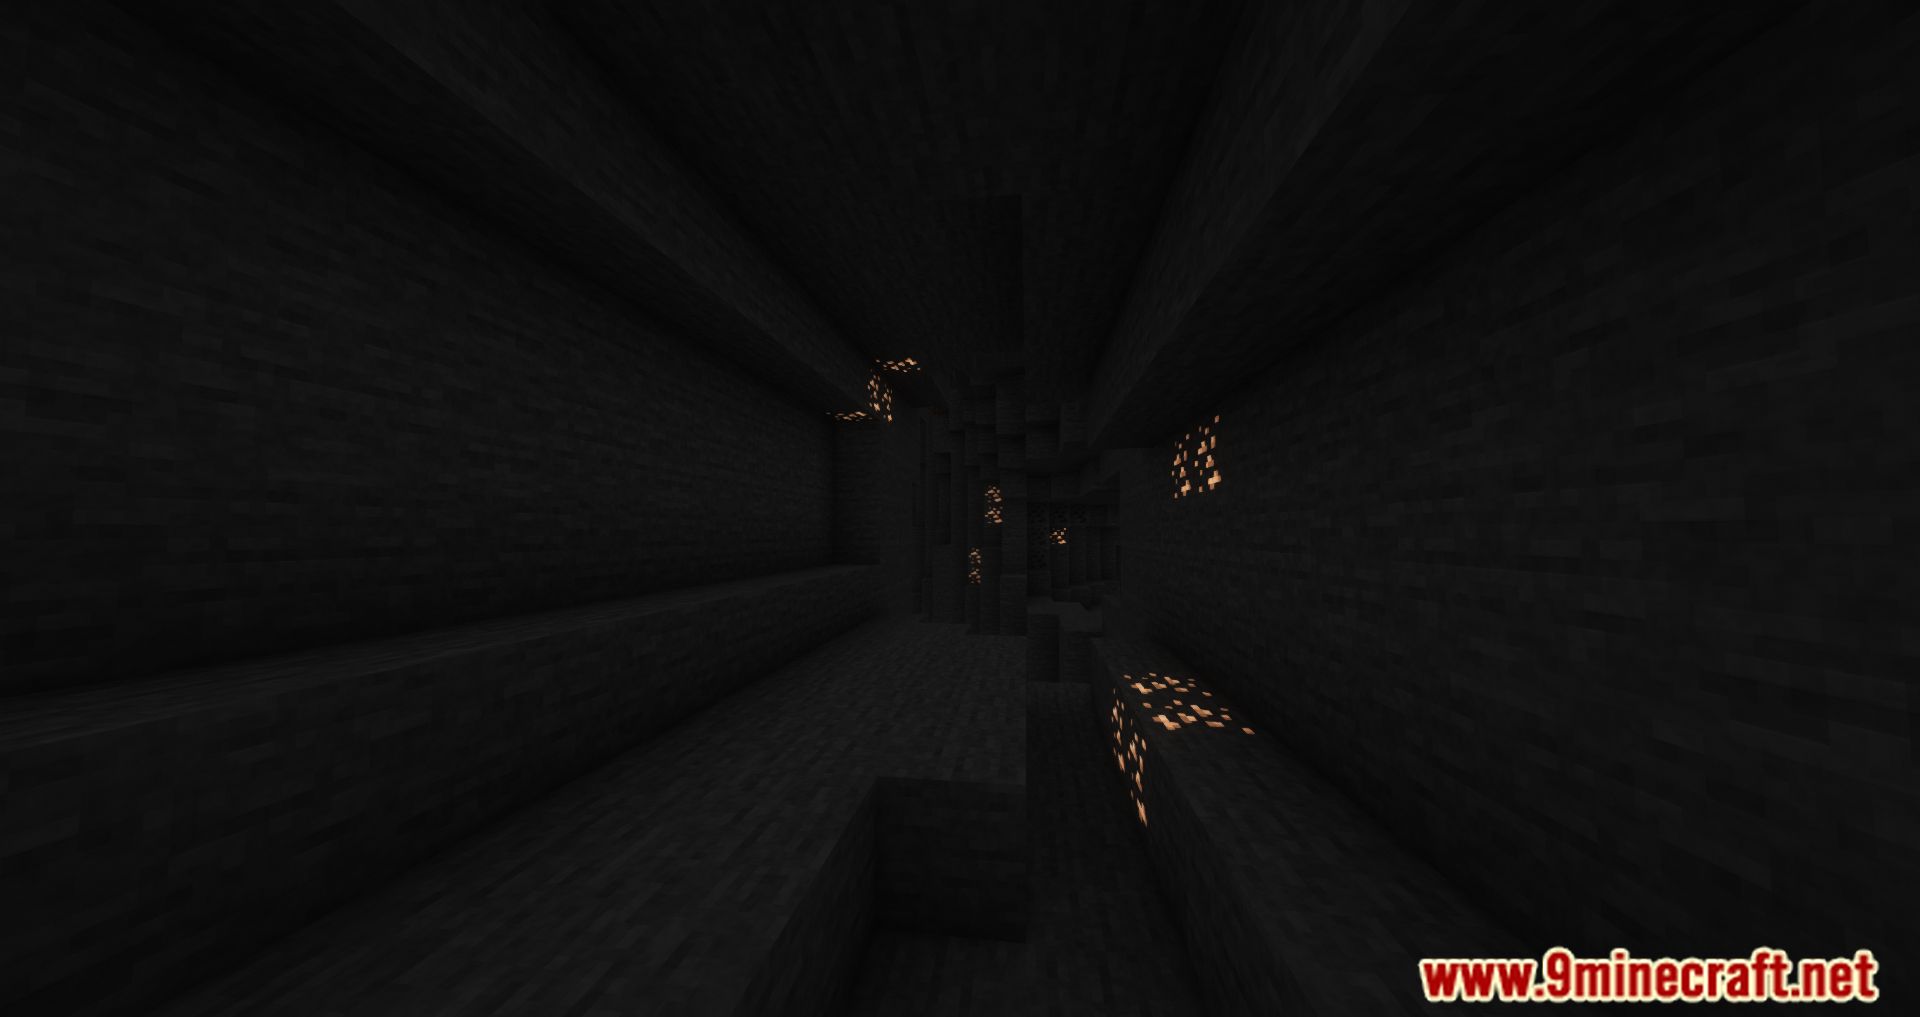 Cave Generator Mod (1.16.5, 1.12.2) - Fully Customize Mojang's Tunnels 8